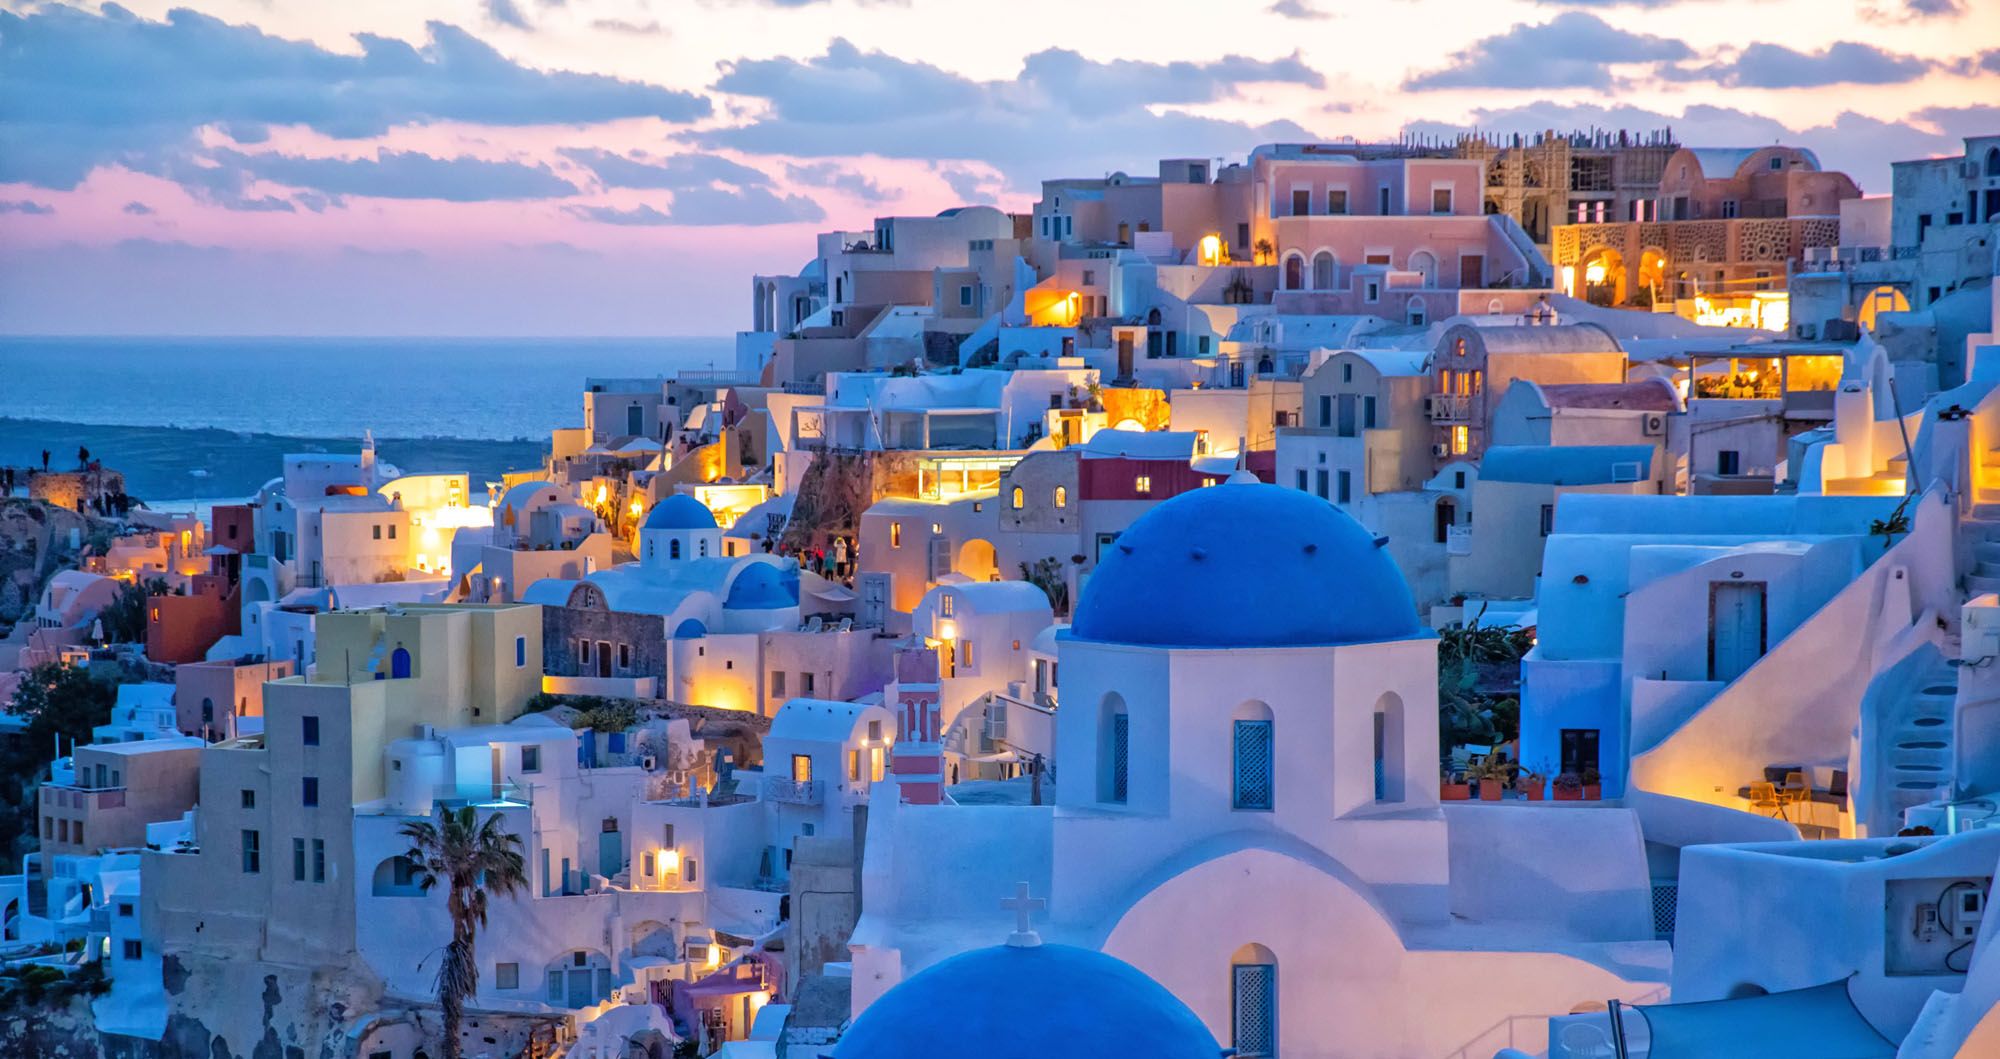 Featured image for “Sunset in Oia, Santorini: 2 Amazing Photography Locations”